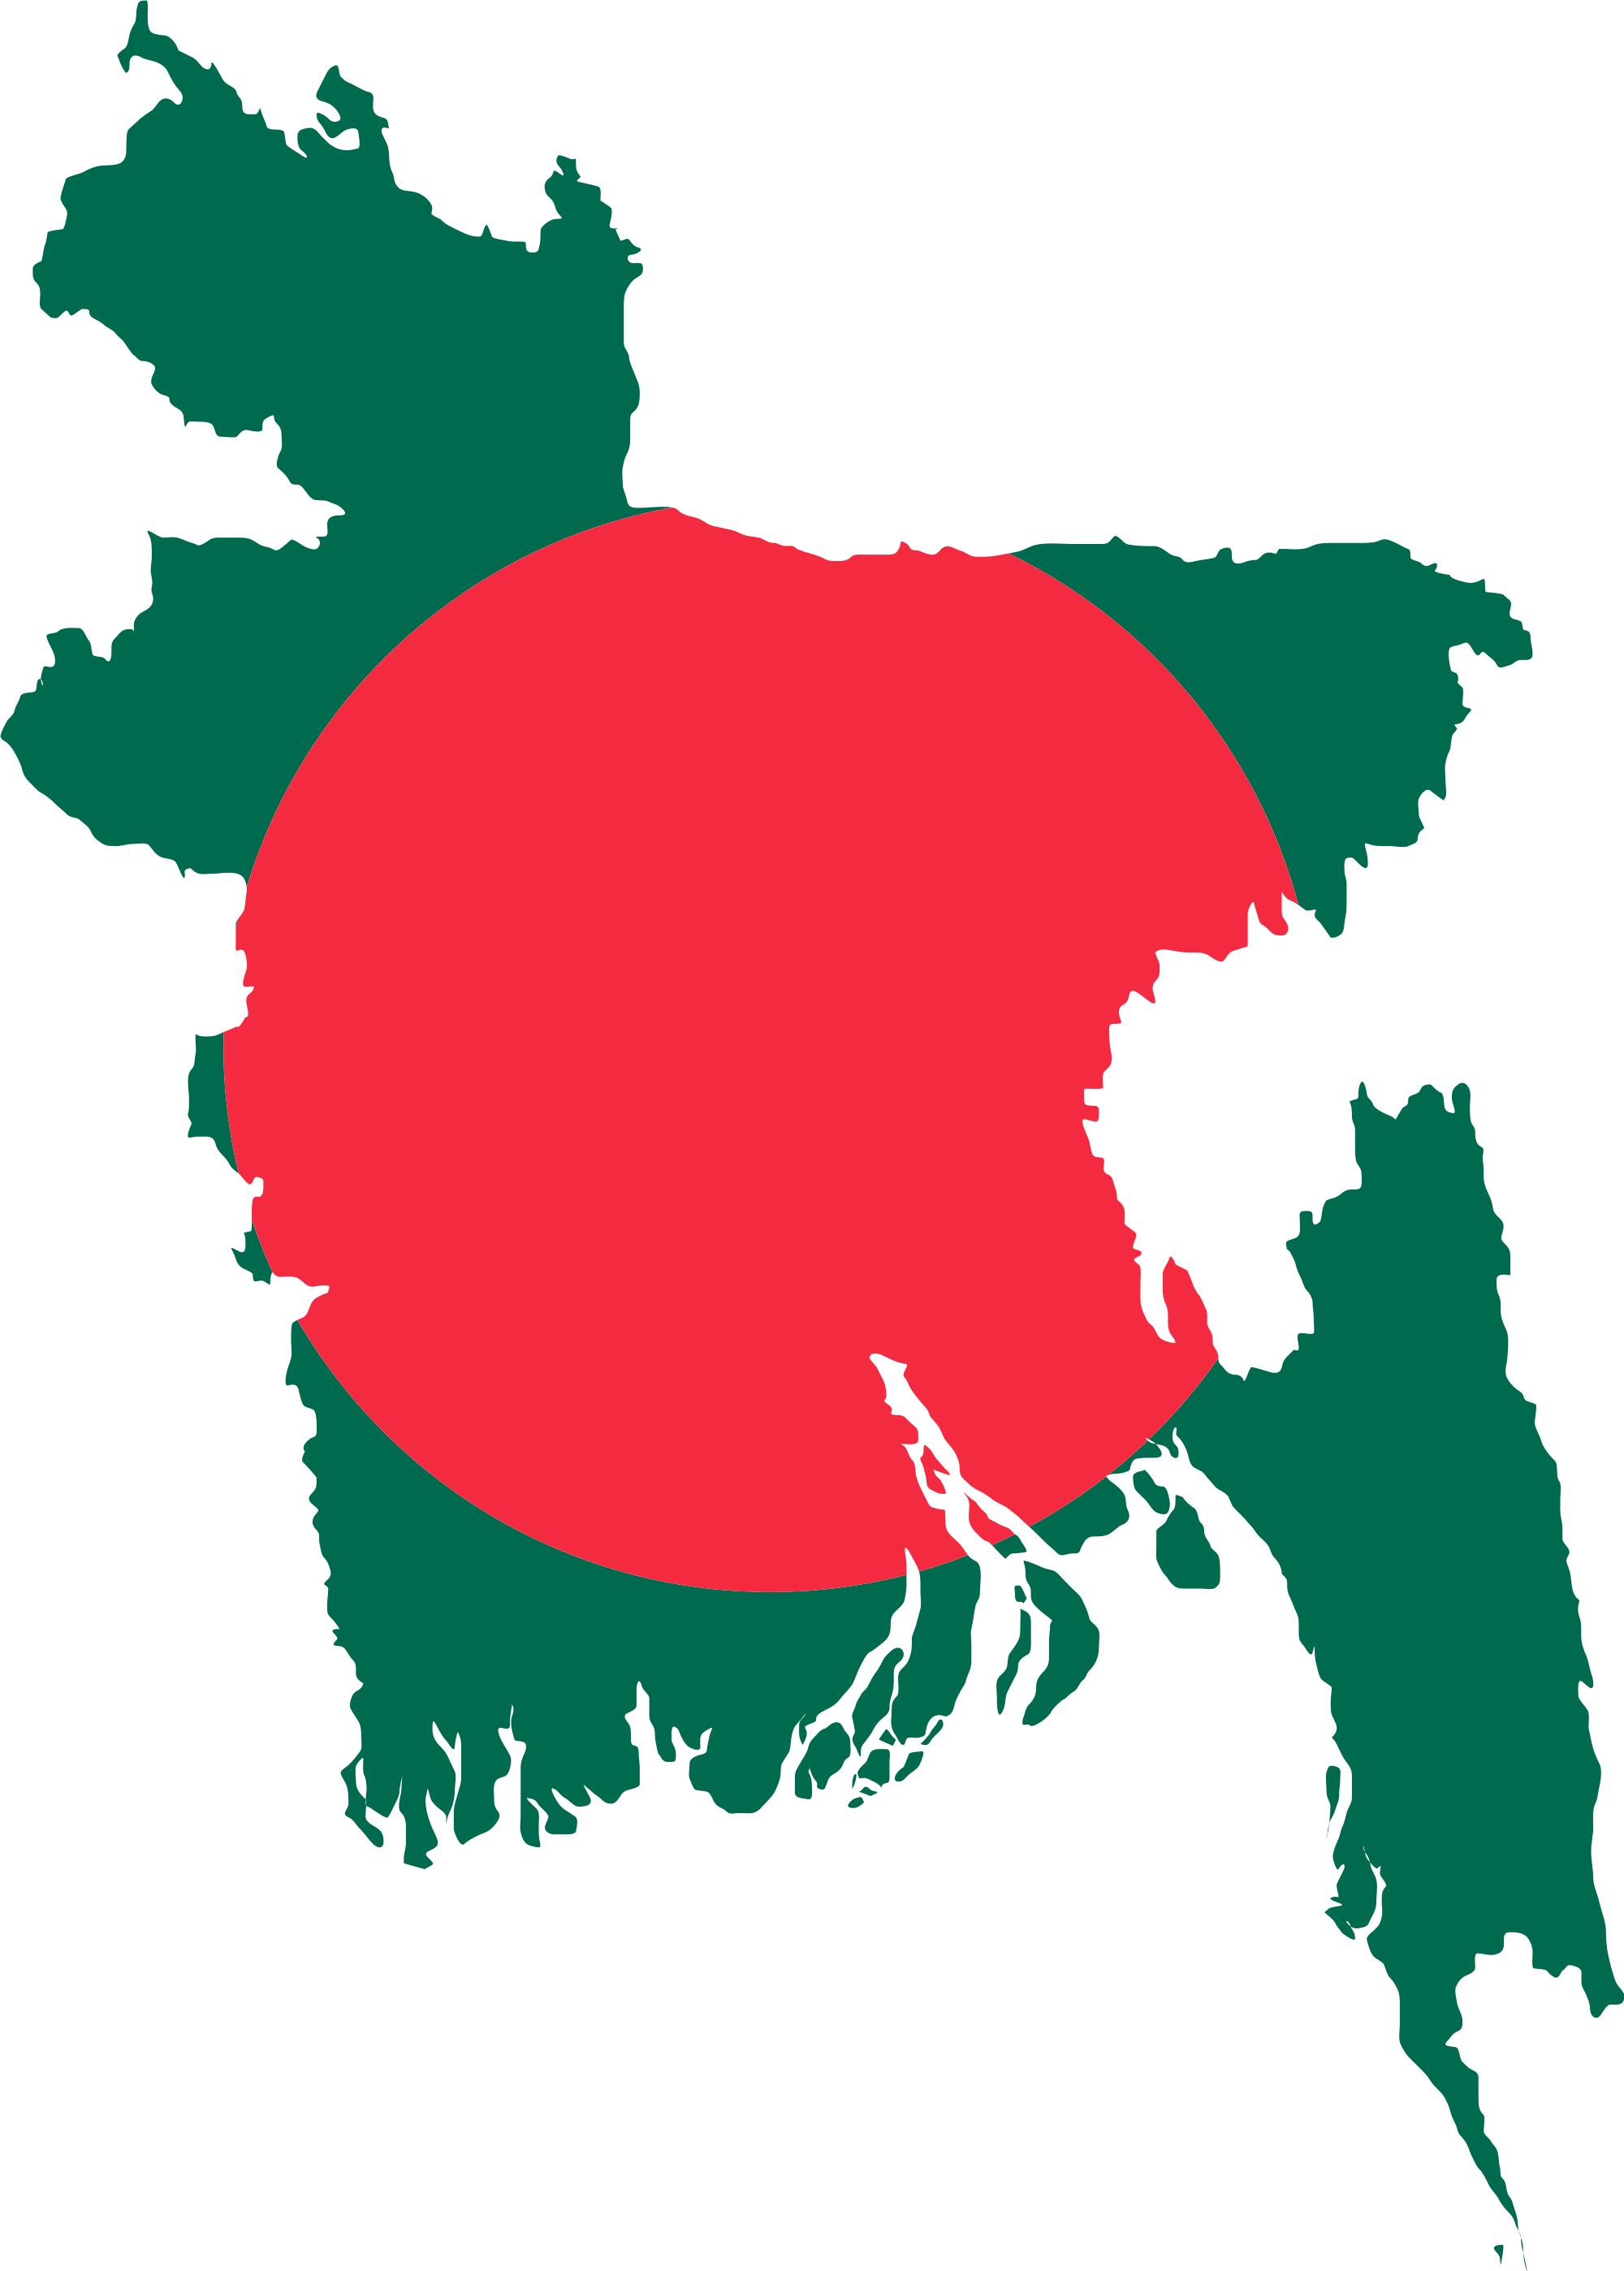 Bangladesh became an independent country in 1971. in 2019